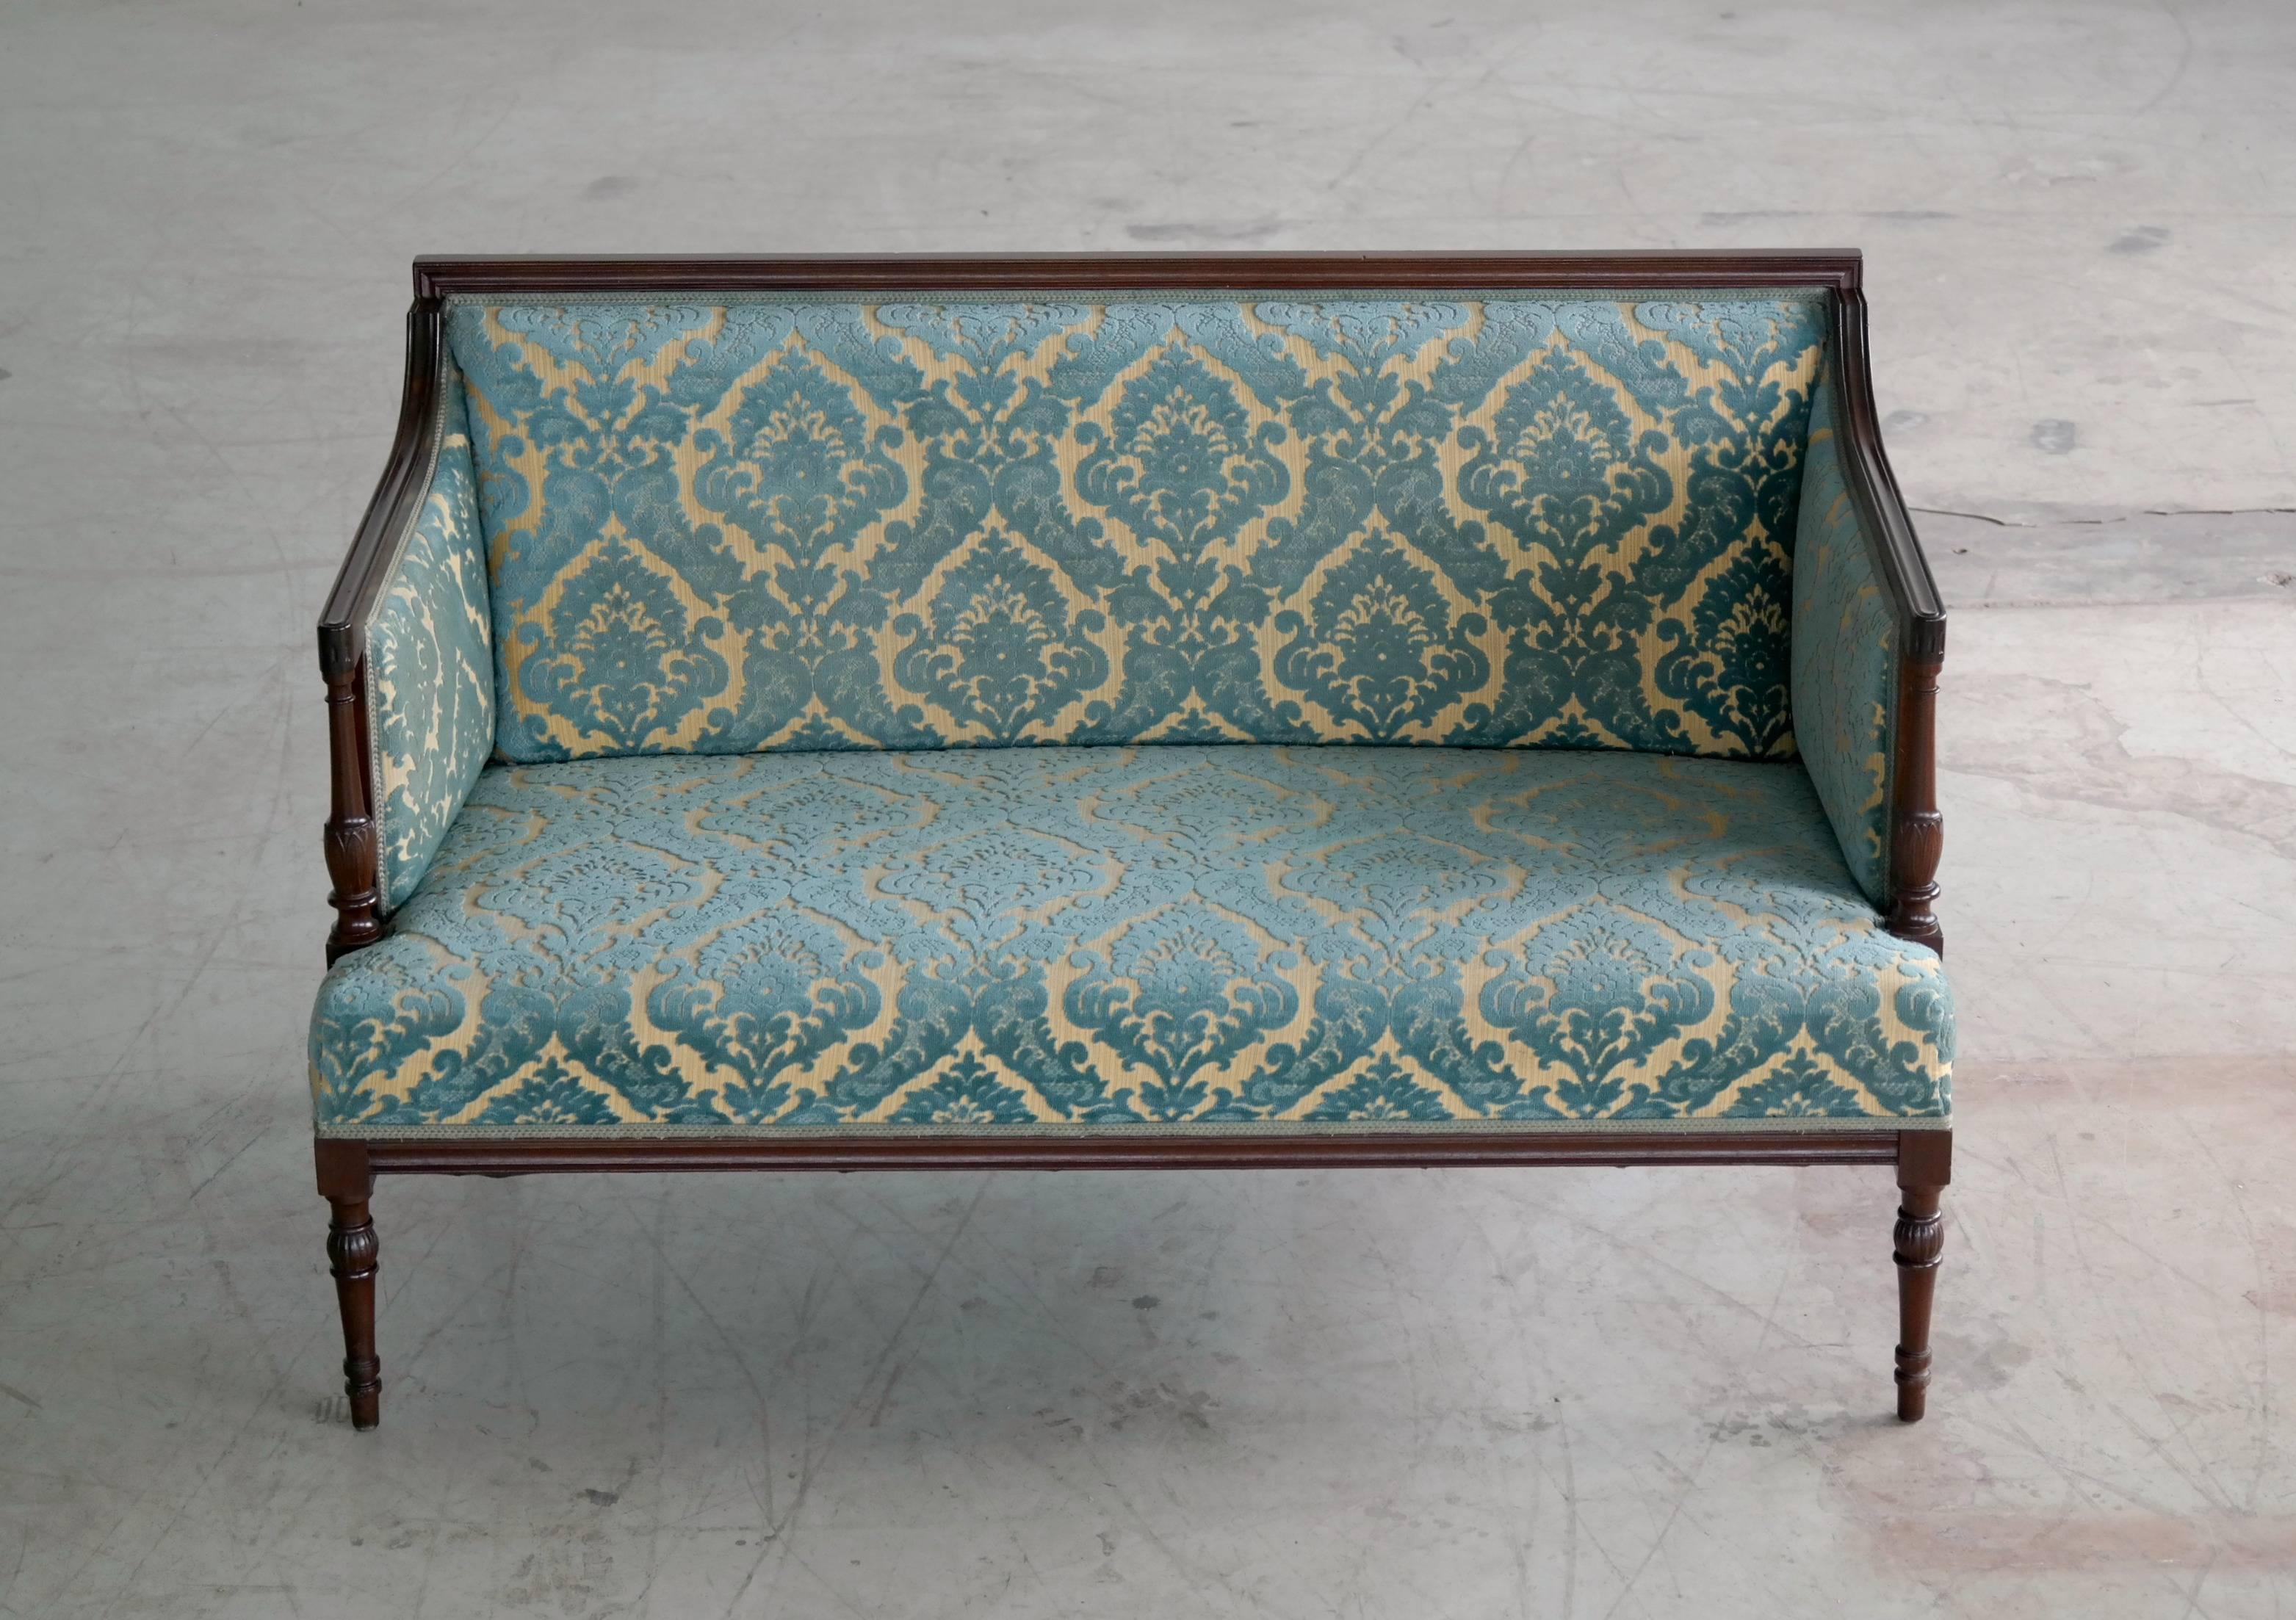 Very rare Sheraton-style settee by the Master cabinet maker Georg Kofoed. Turned front legs and profiled edges. All mahogany in very good to excellent condition. Danish elegance and charm at its best.
  